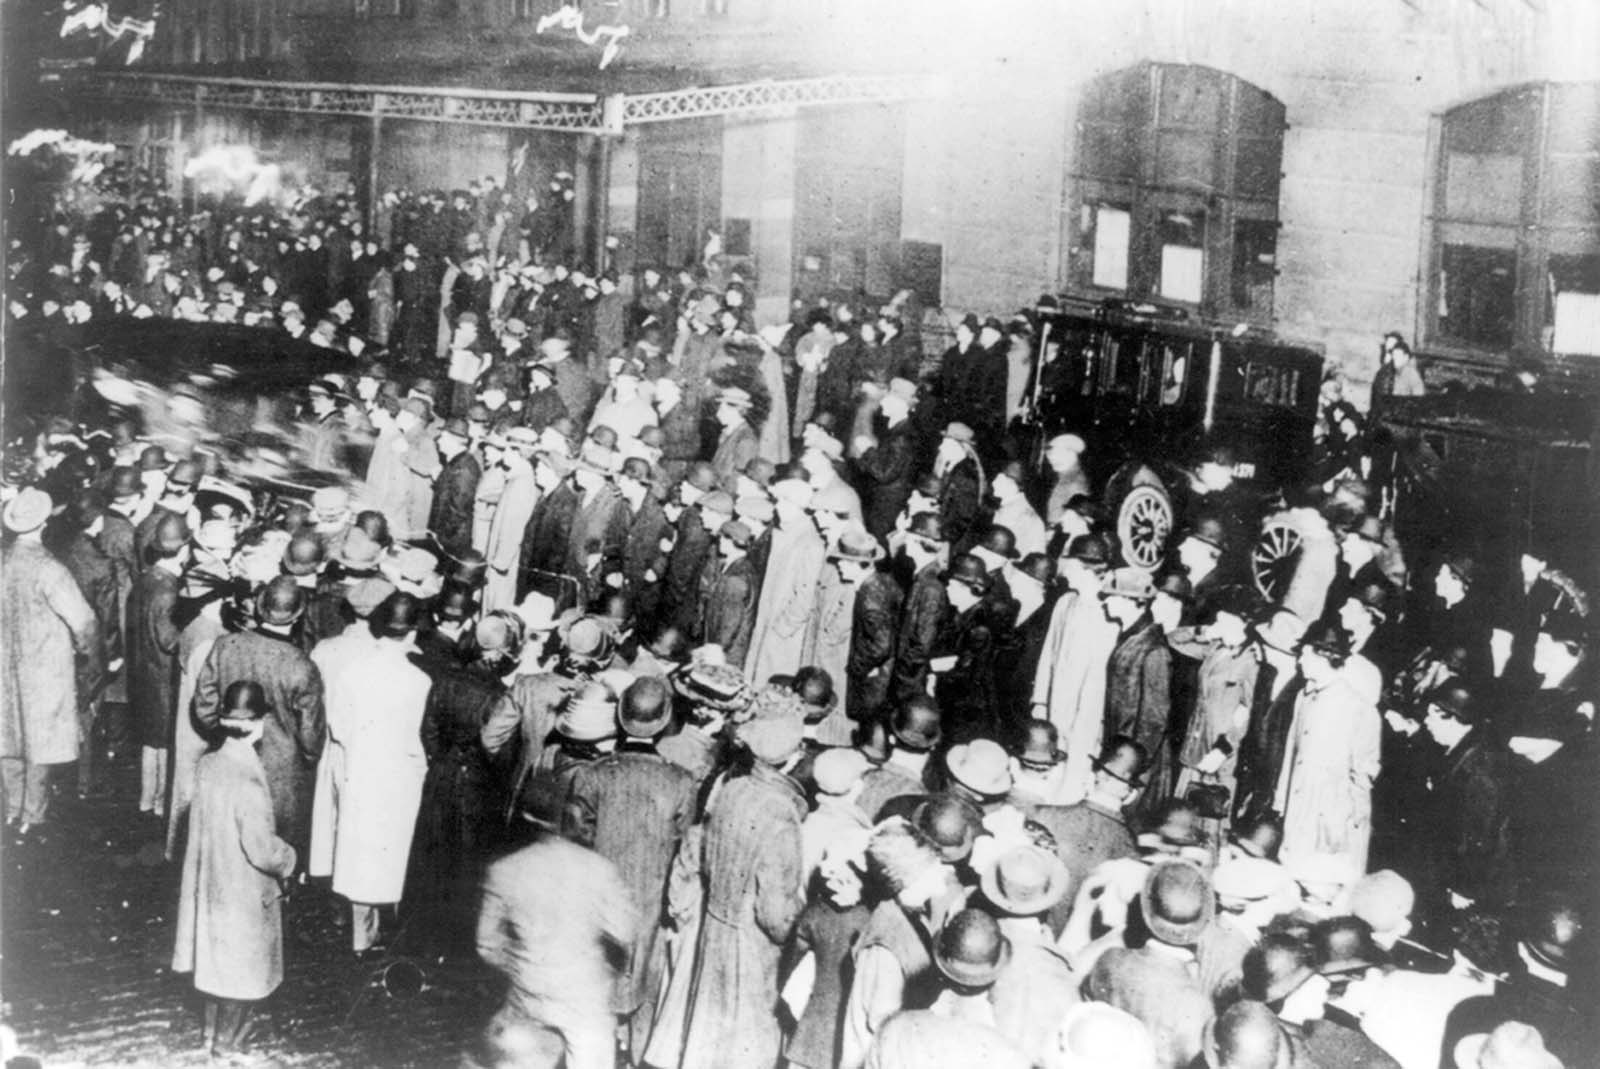 Crowds stand in the rain awaiting the arrival of the Carpathia in New York.